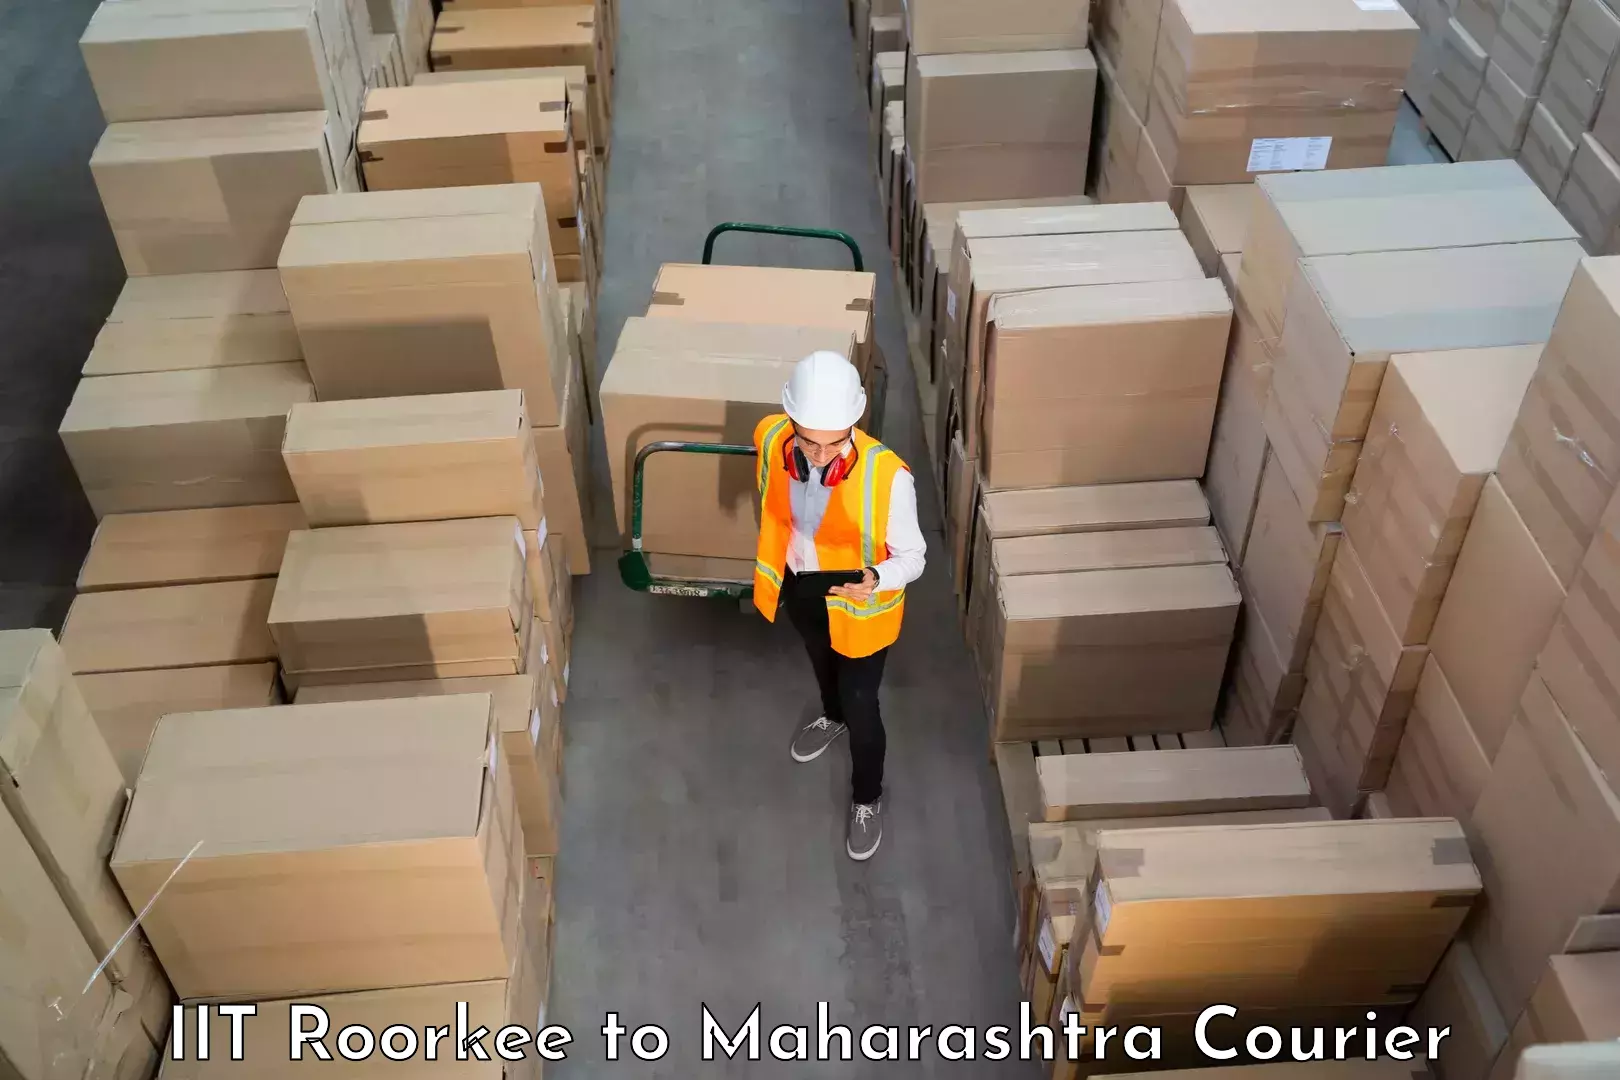 Expert packing and moving IIT Roorkee to Mumbai